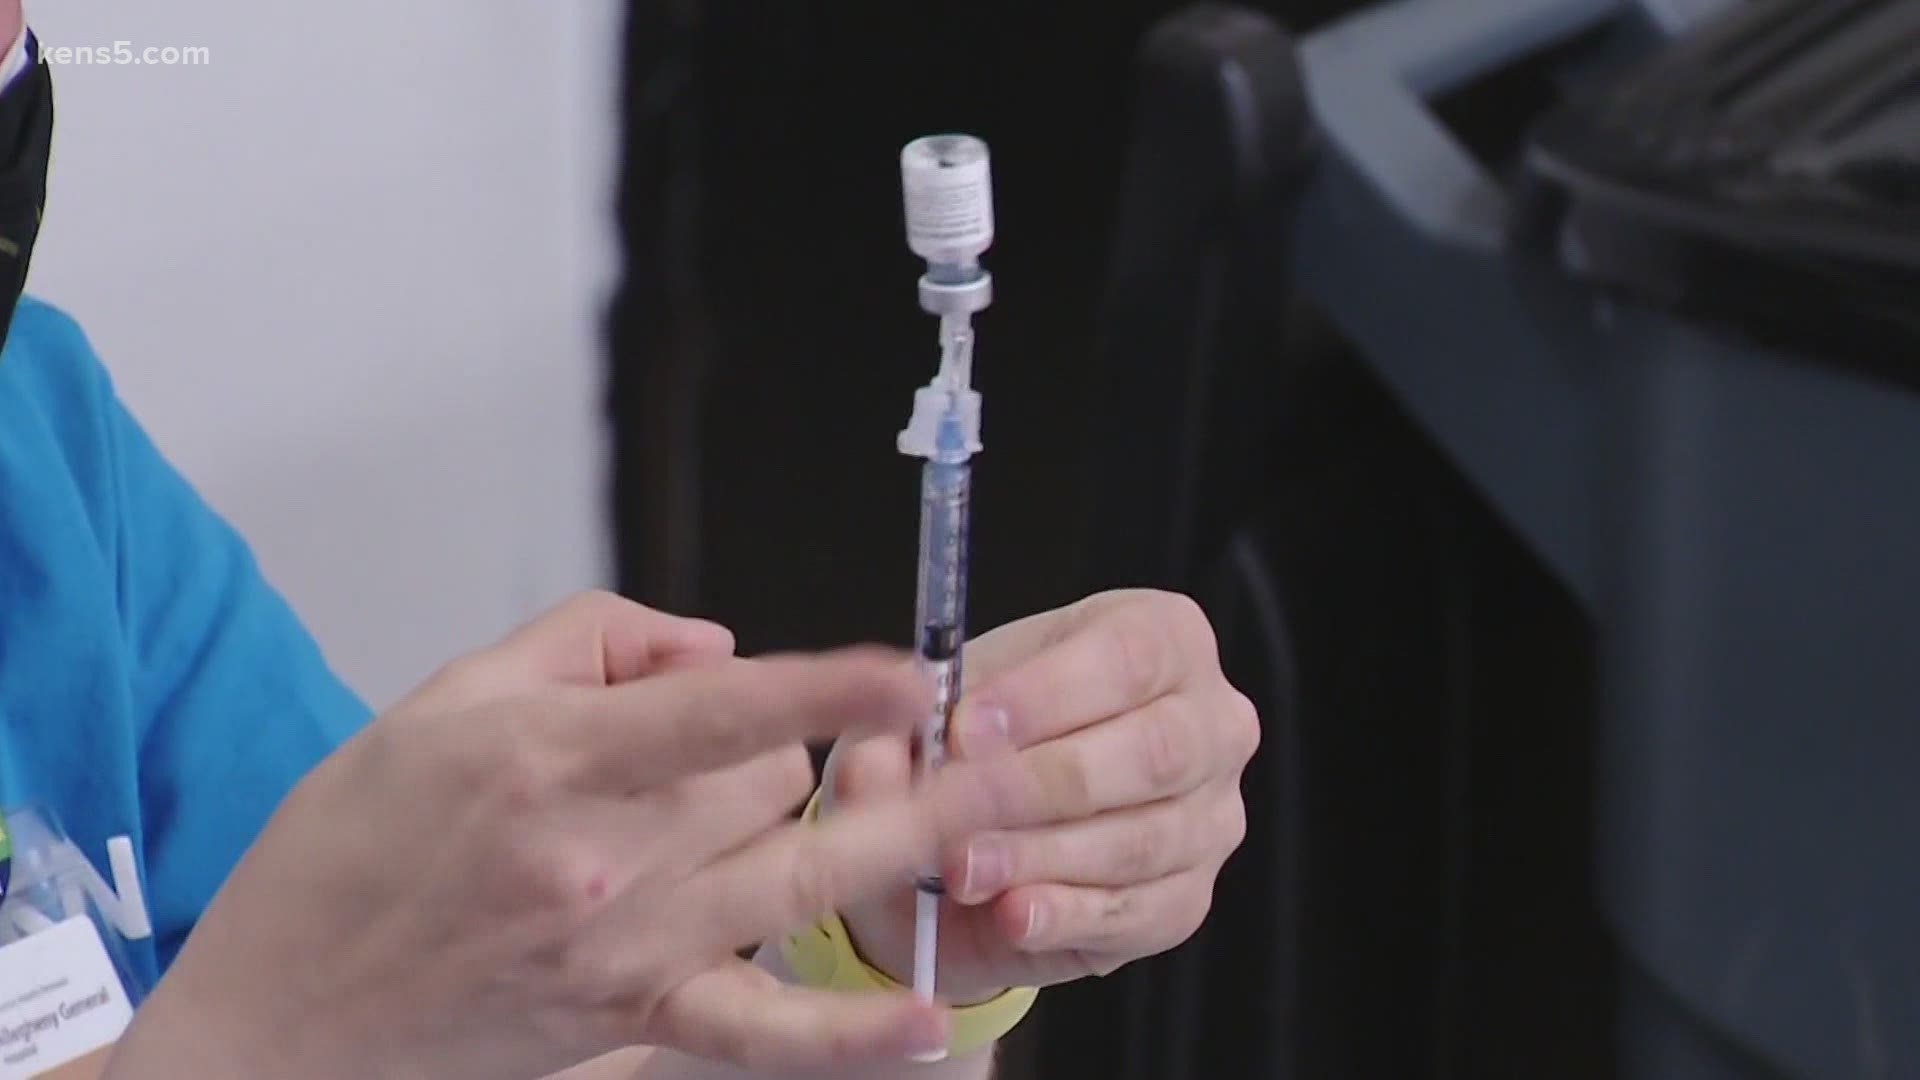 City leaders are encouraging people, especially kids who qualify, to get vaccinated.